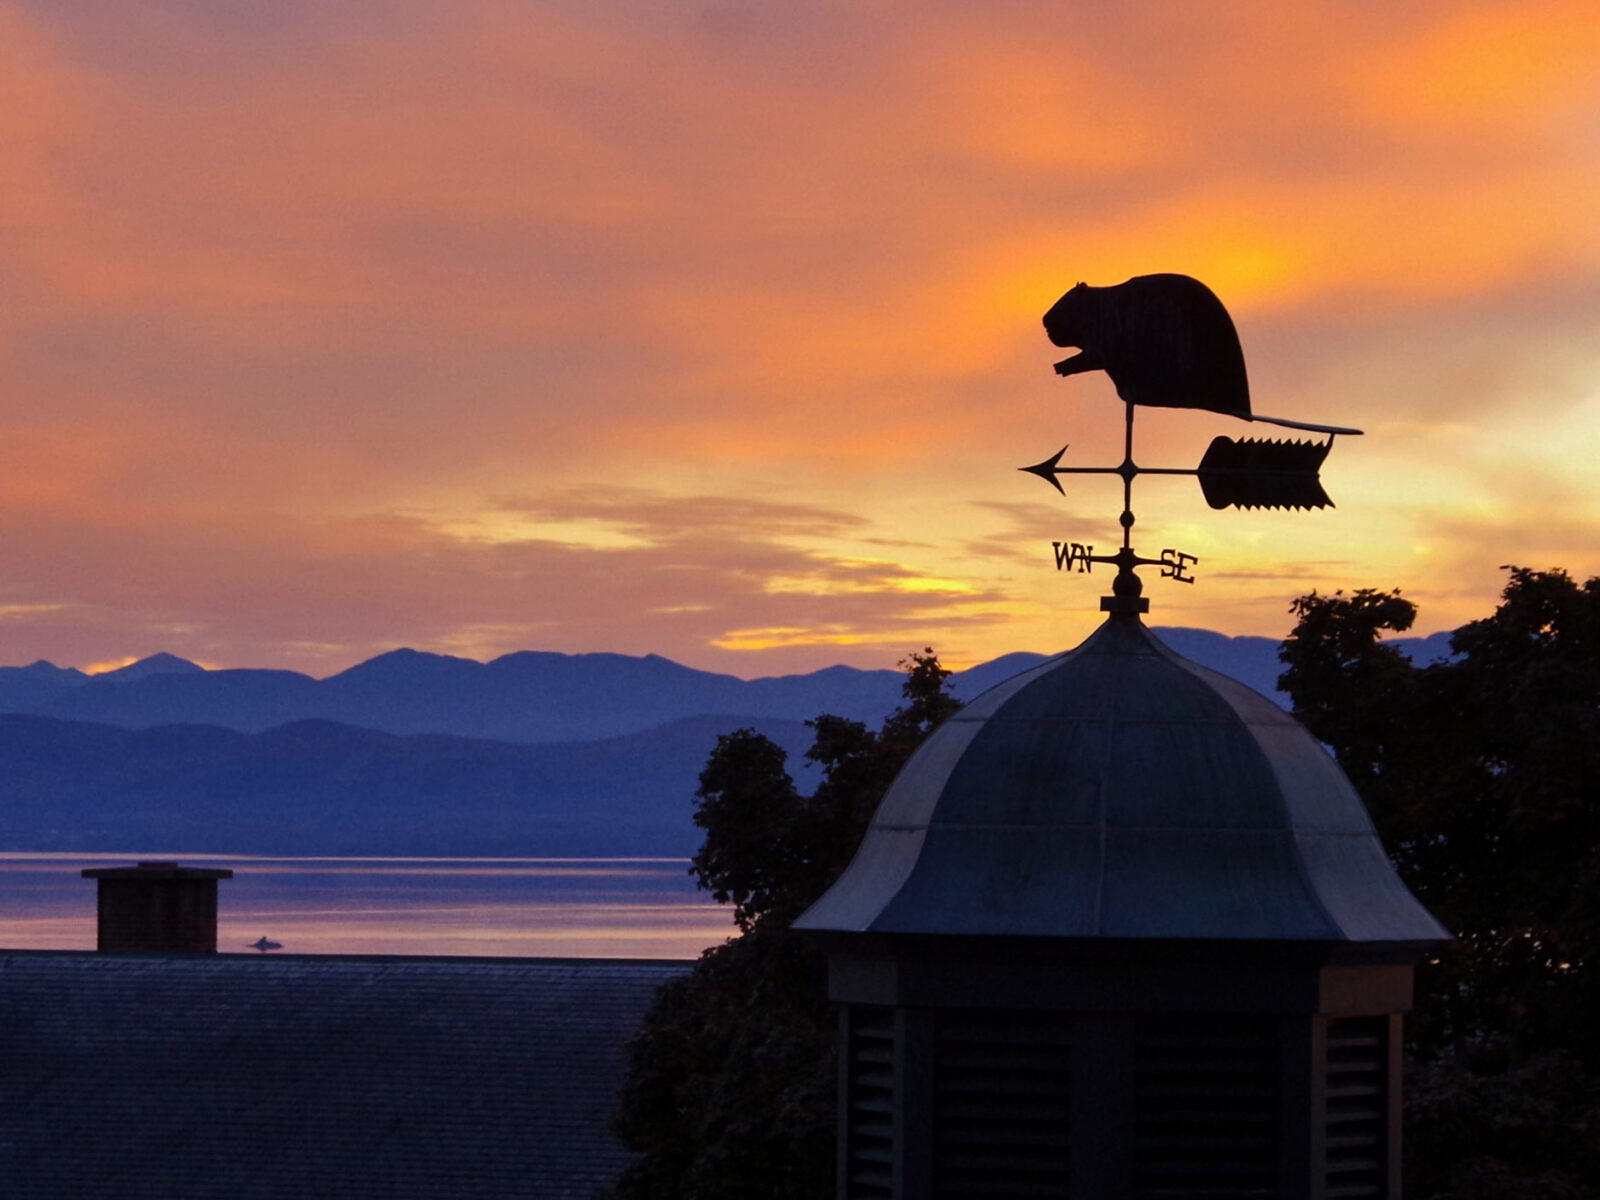 beaver weathervane stop a building during sunset